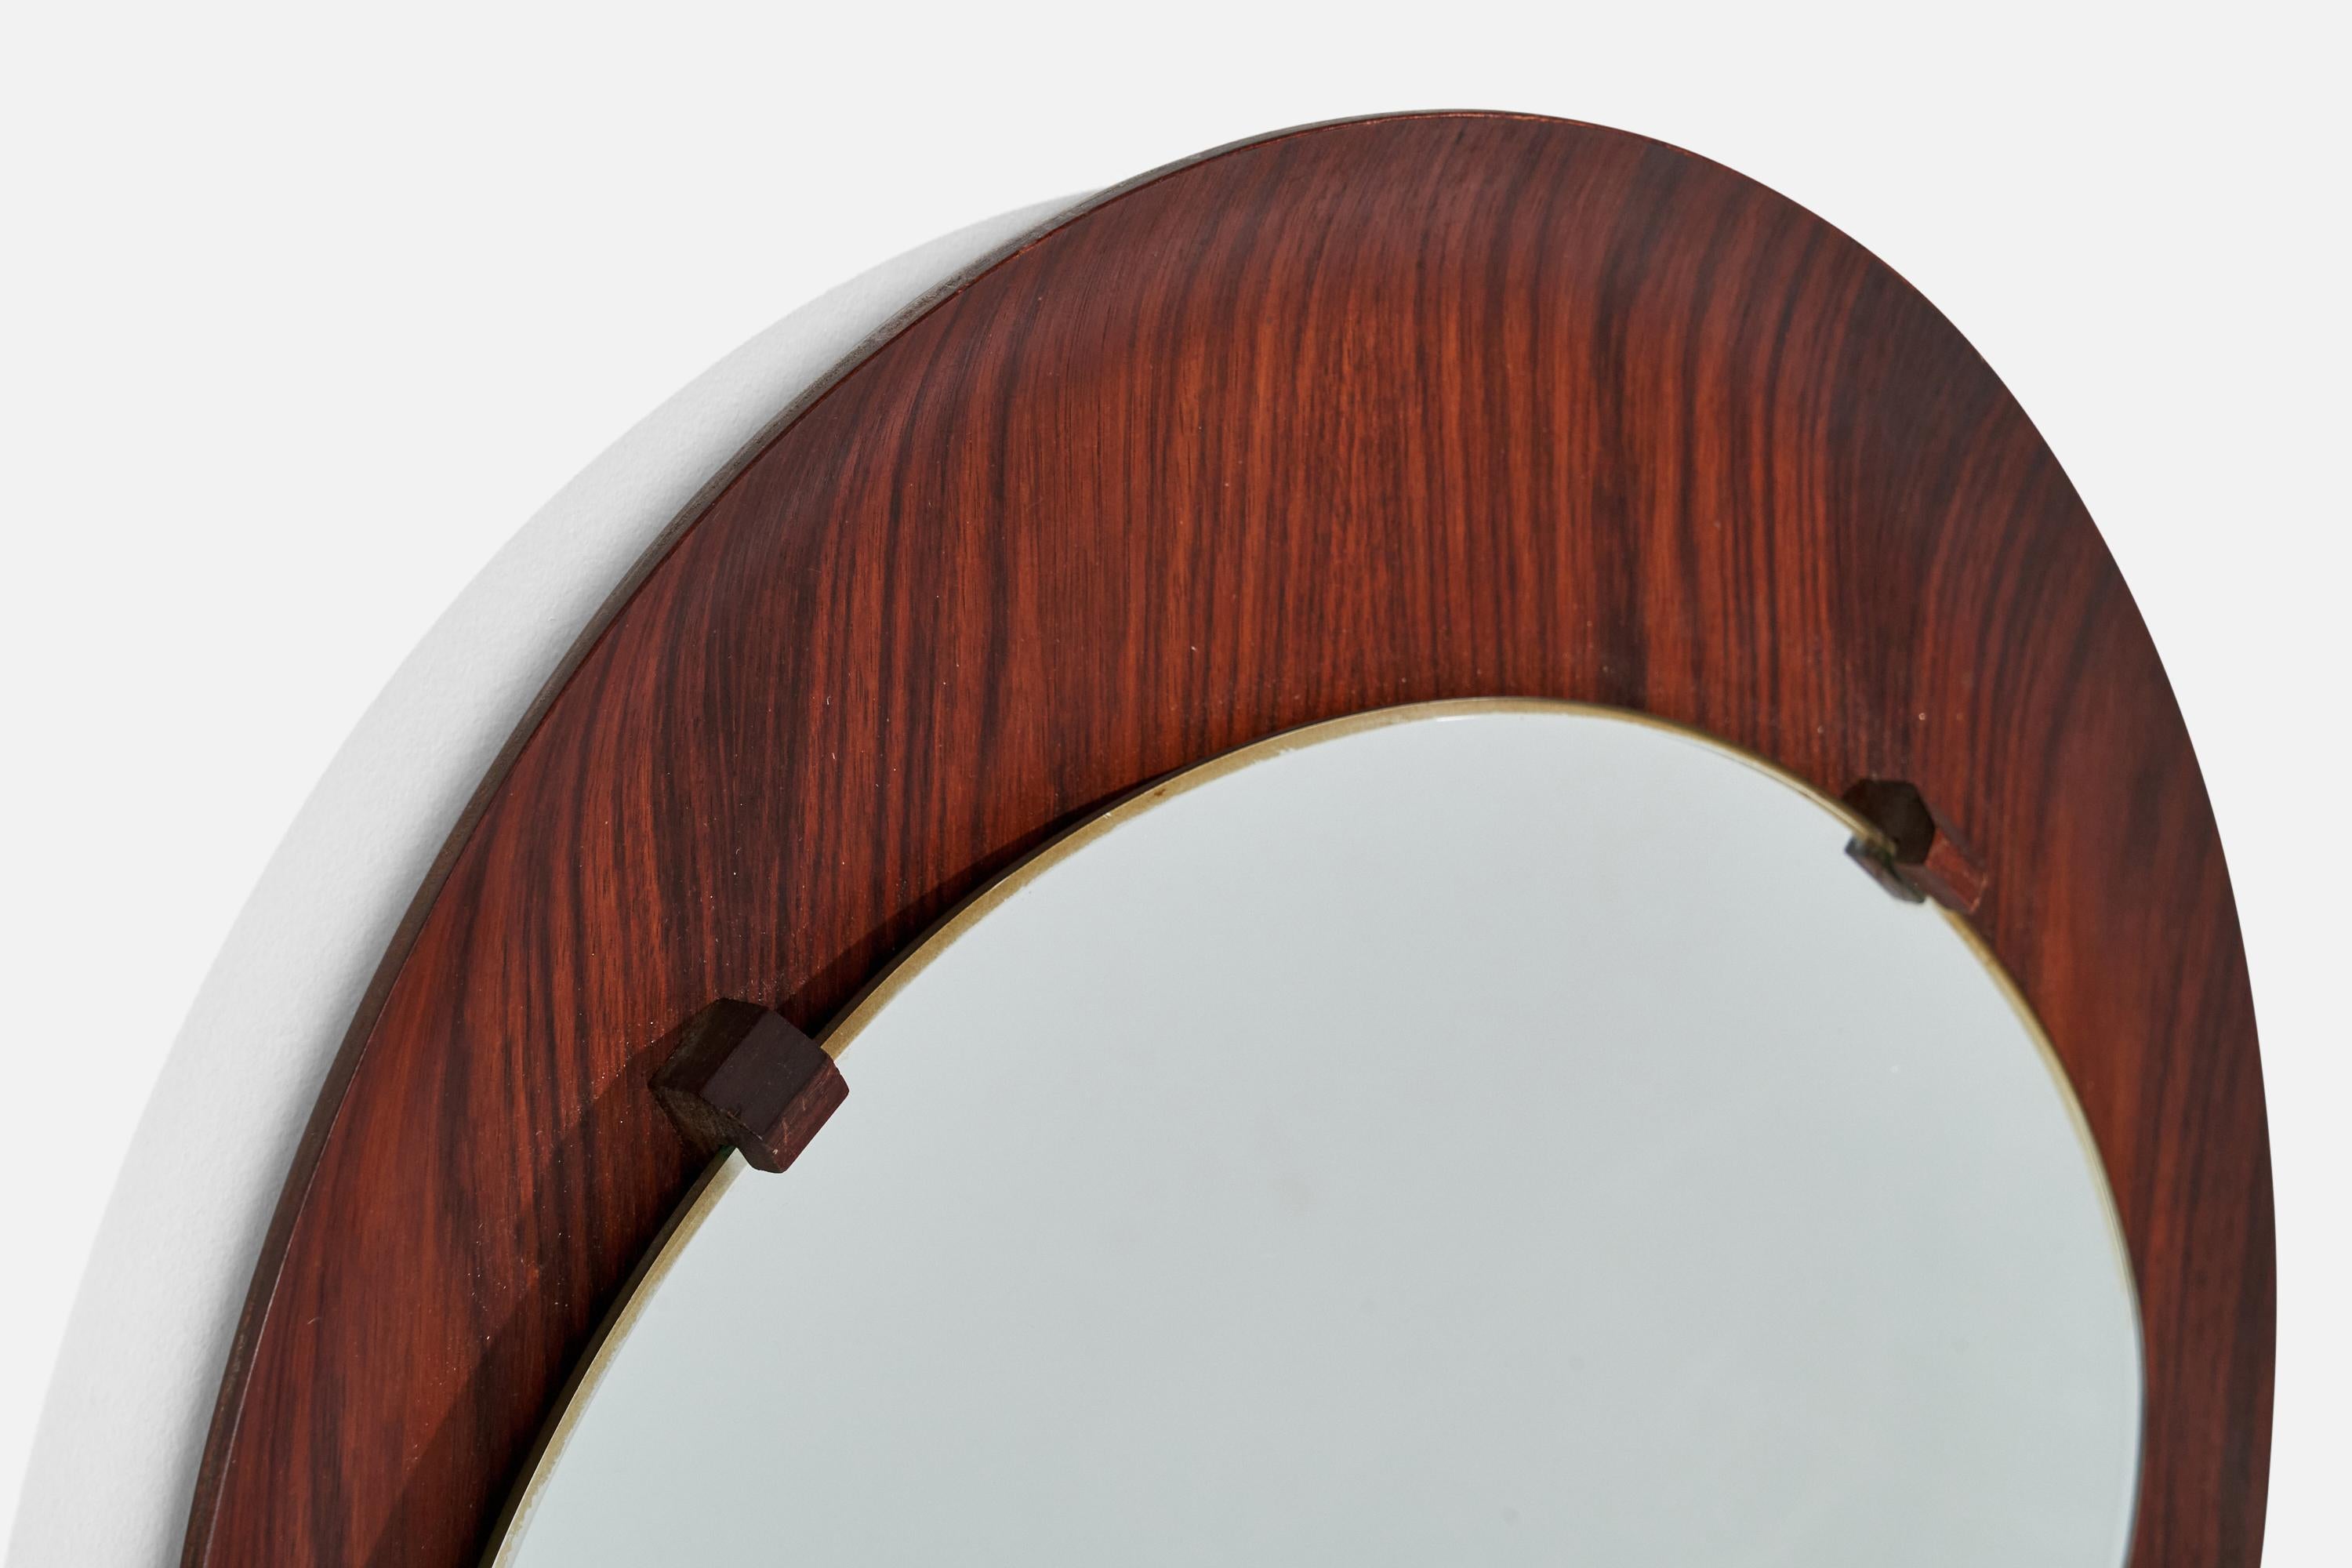 Campo & Graffi 'Attributed', Wall Mirror, Rosewood, Mirror Glass, Italy, 1950s In Good Condition For Sale In High Point, NC